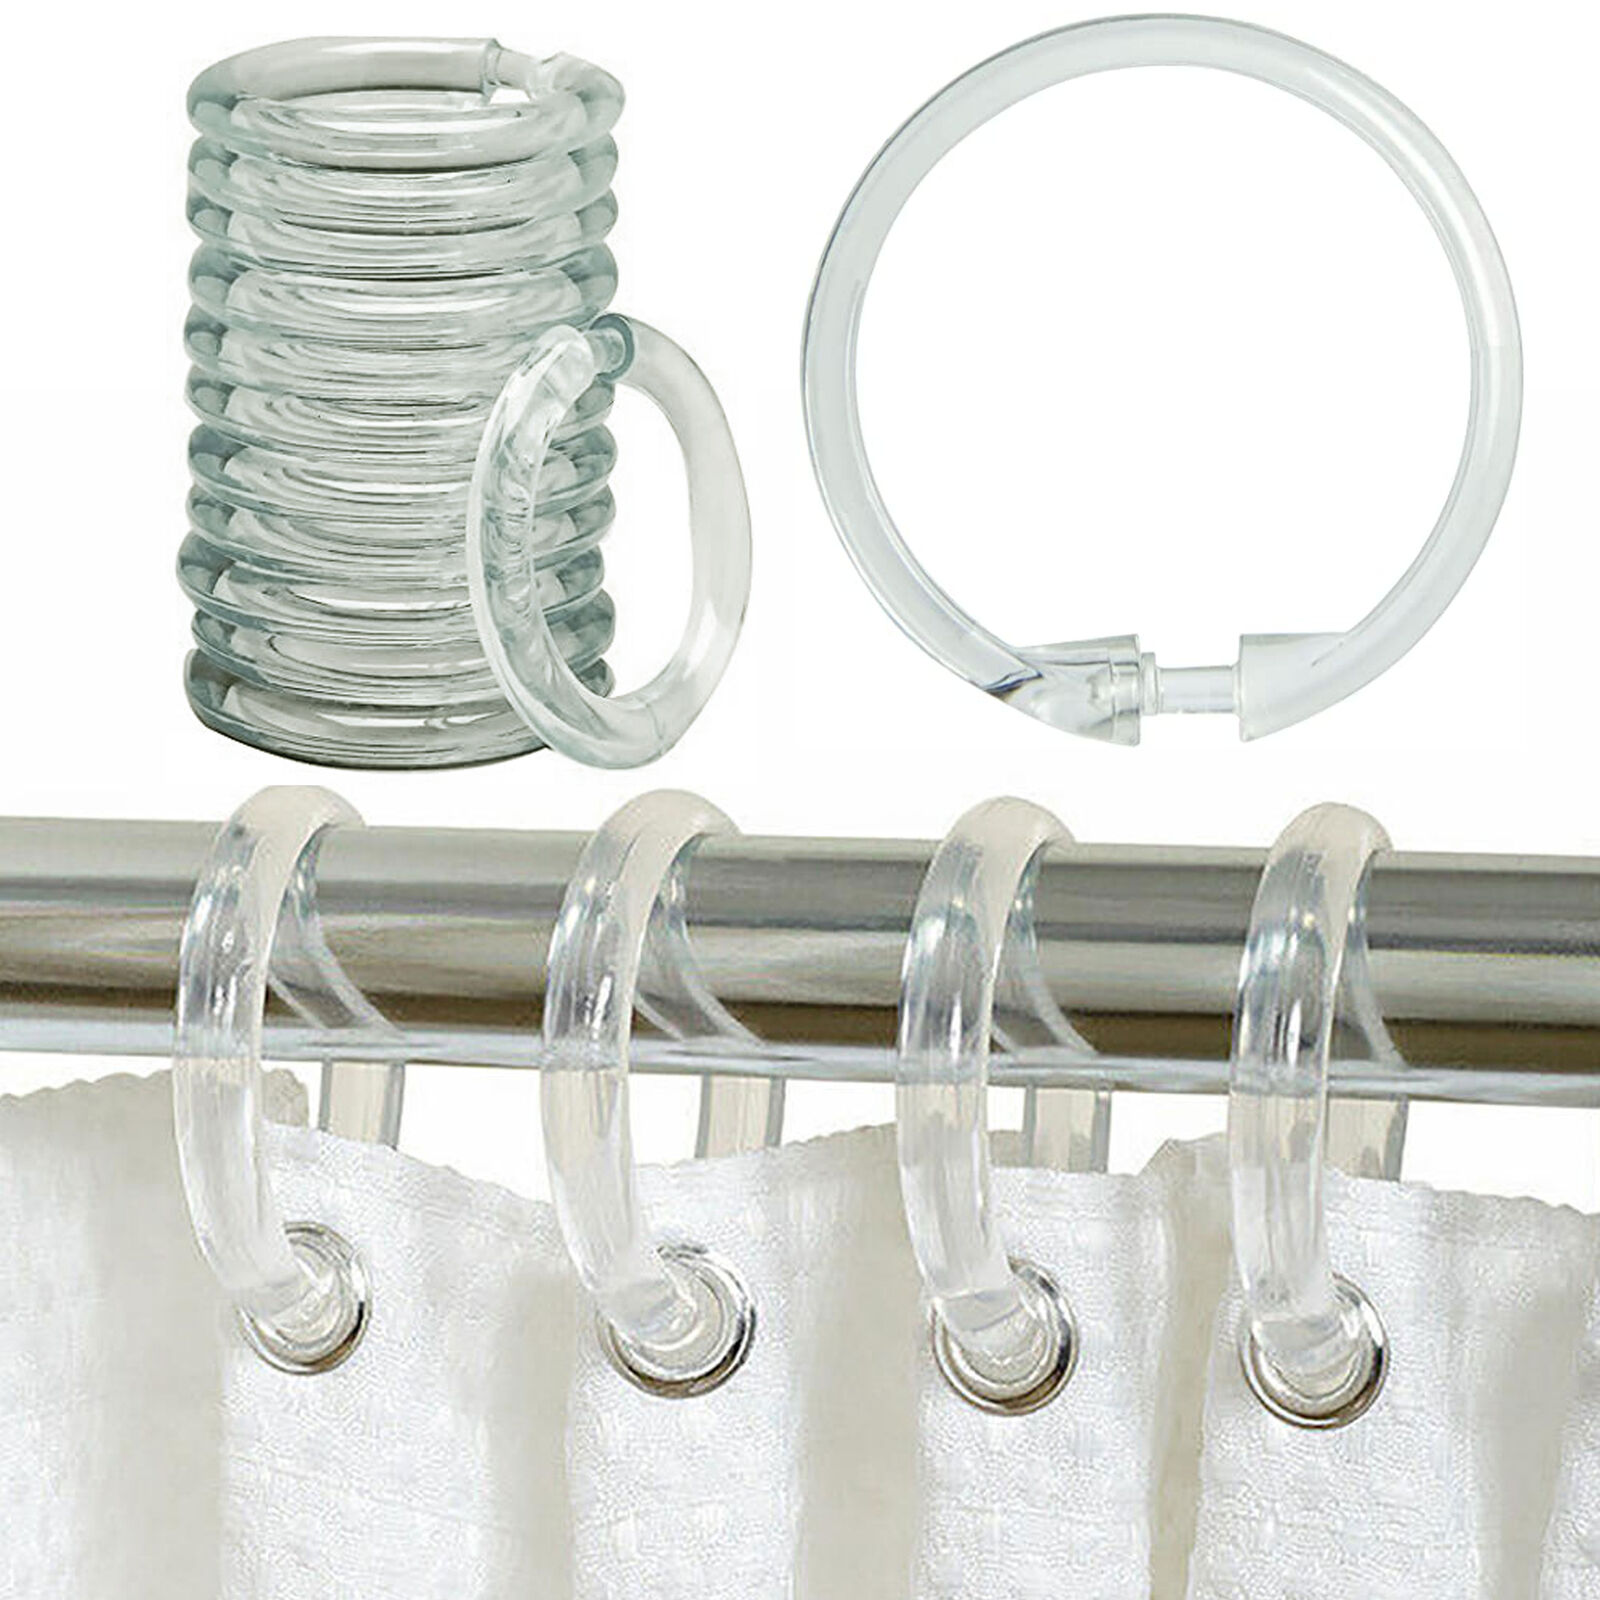 12 Pc Plastic Curtain Round Rings Clear Shower Hooks Rod Bathroom Shades Drapes